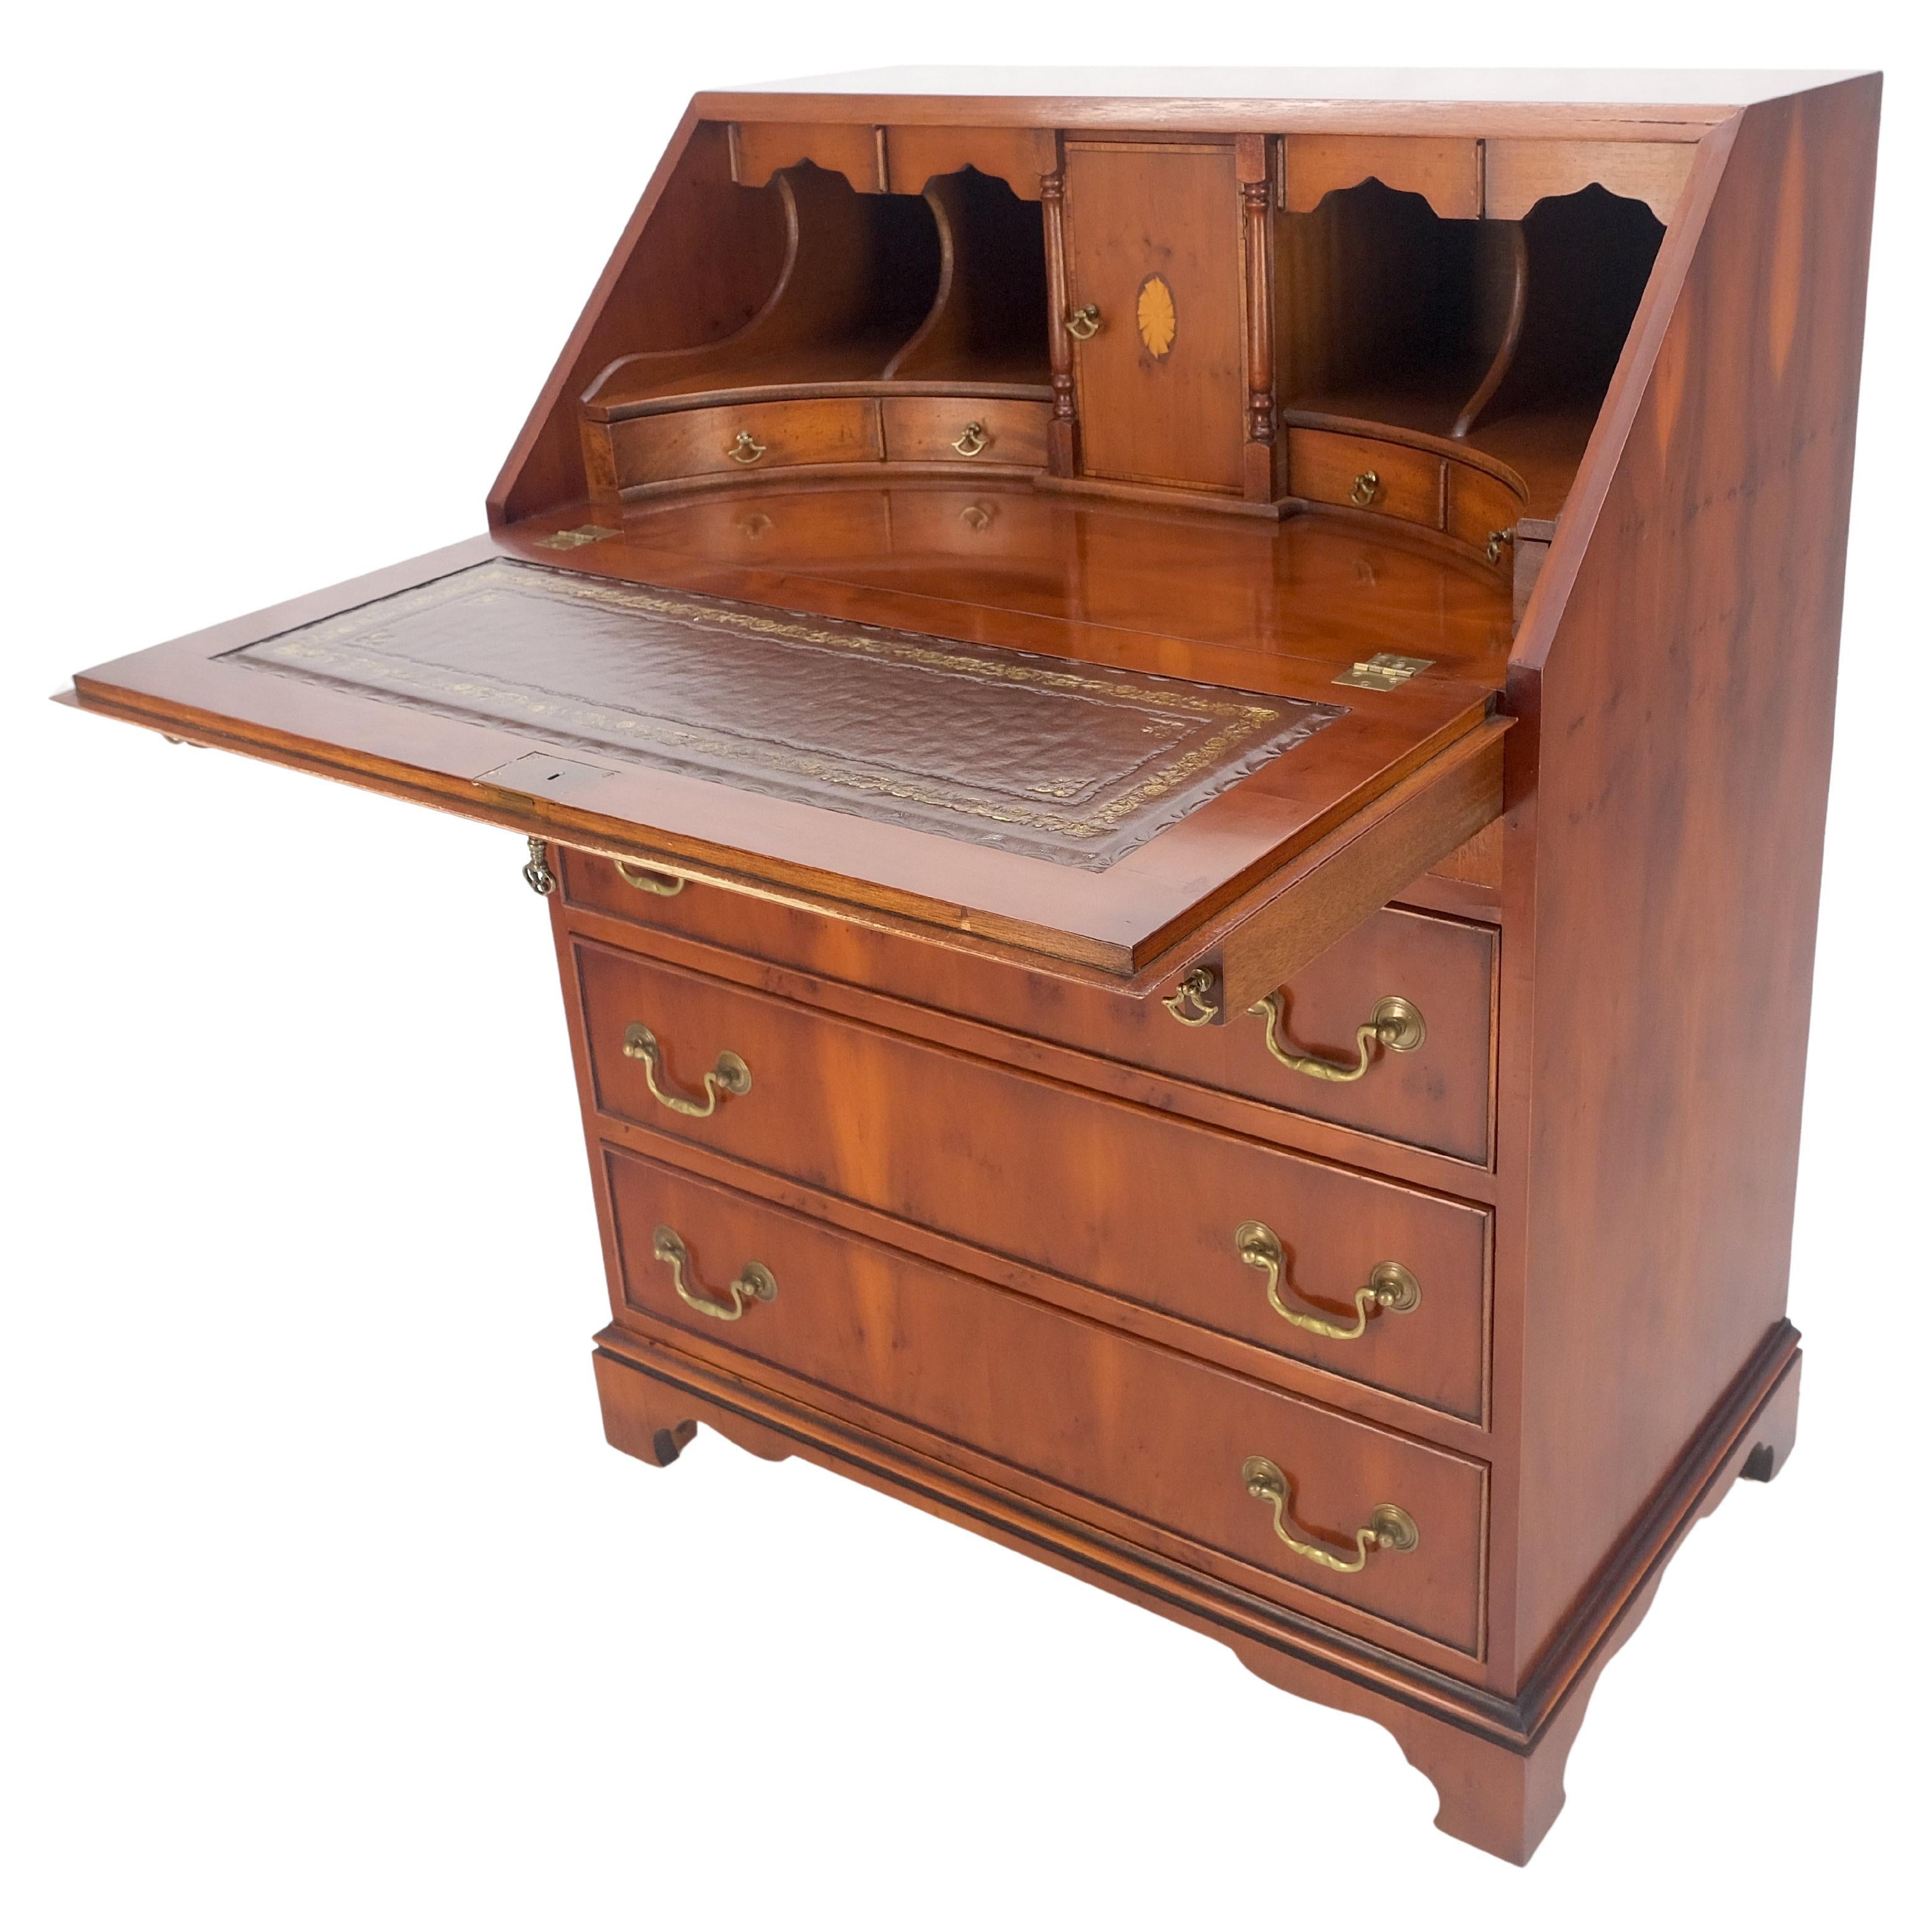 Yew Wood Leather Top Drop Front Secretary Desk 3 Drawers Brass Hardware MINT! For Sale